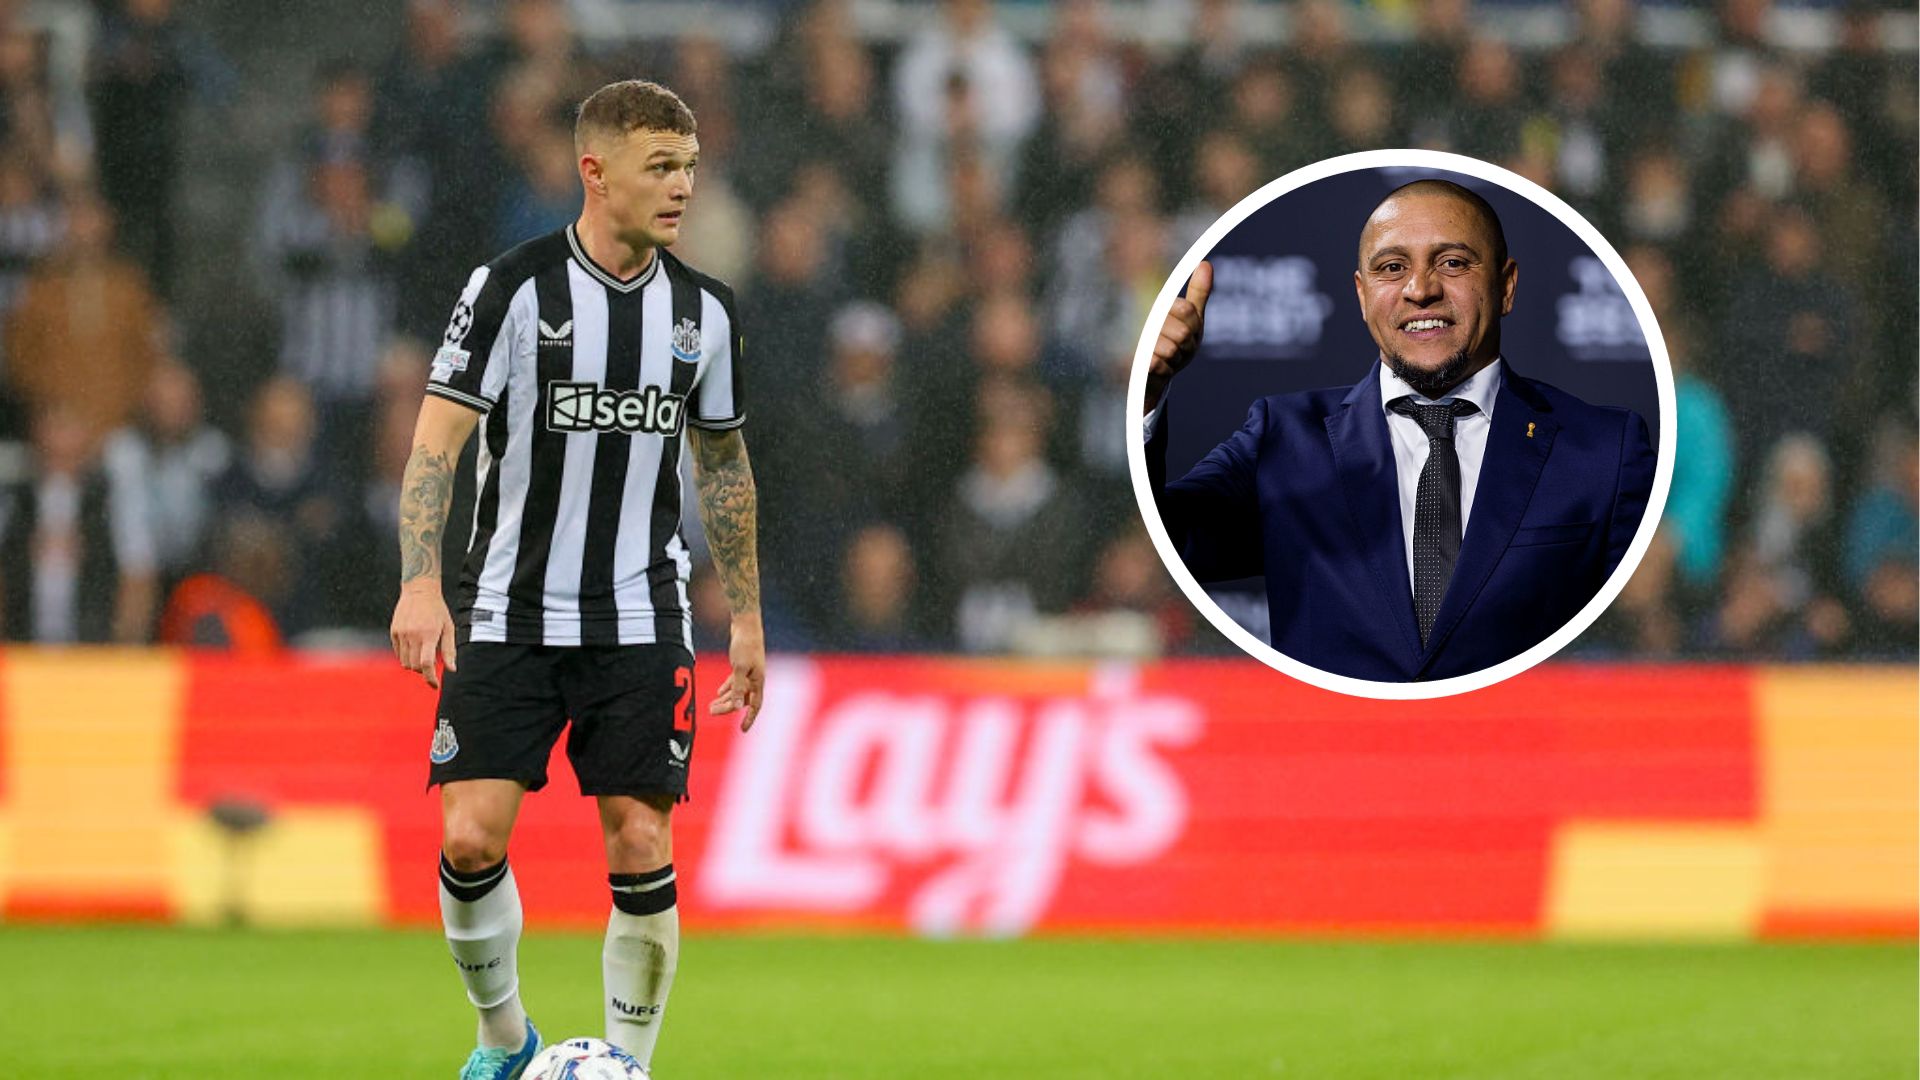 Brazil legend Roberto Carlos 'particularly impressed' with Kieran Trippier - 'I wouldn't have been able to do what he does'